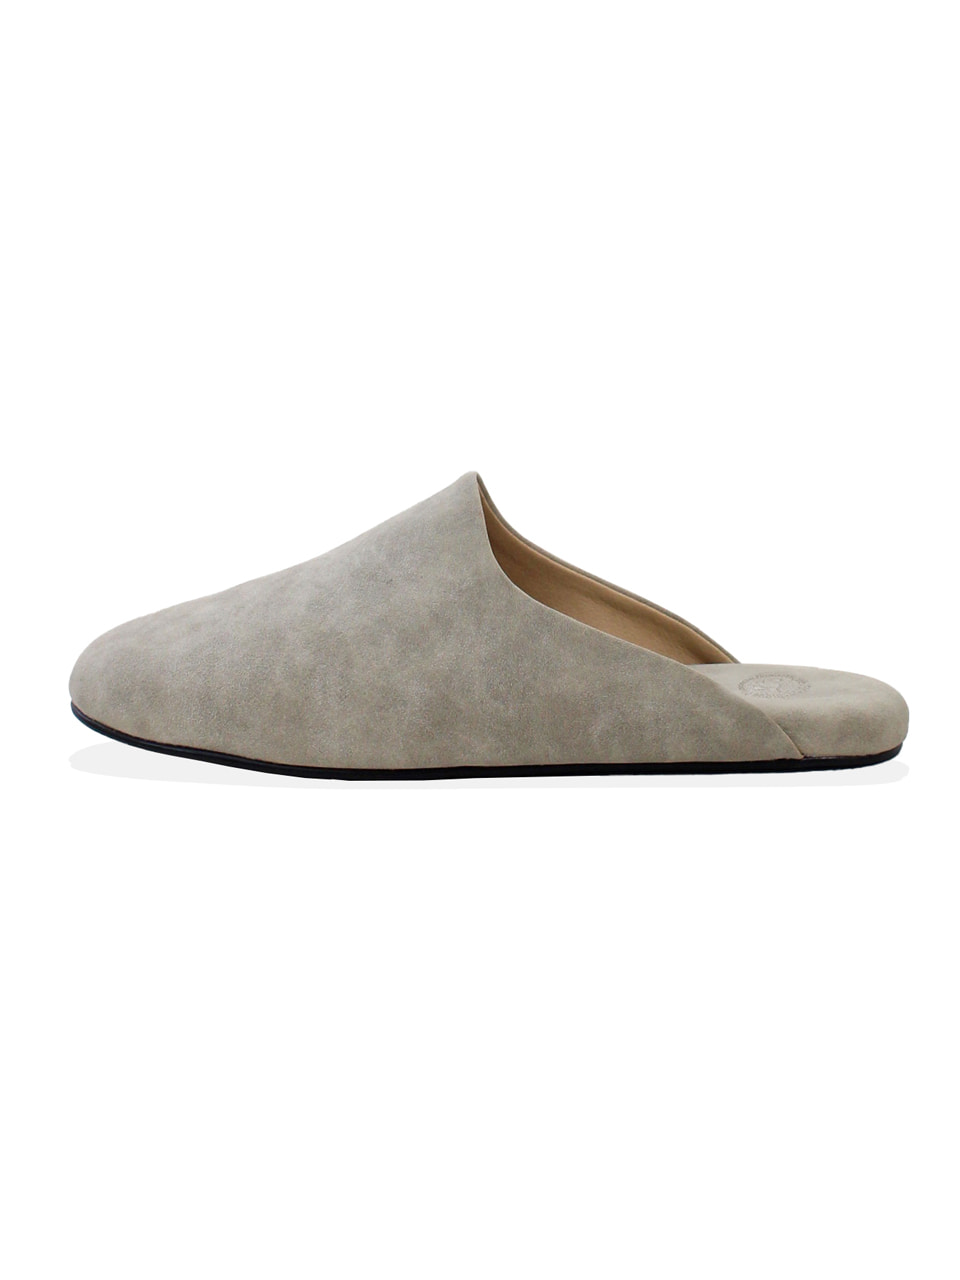 [ VT×Fq ] Lifestyle unisex roomshoes_gray